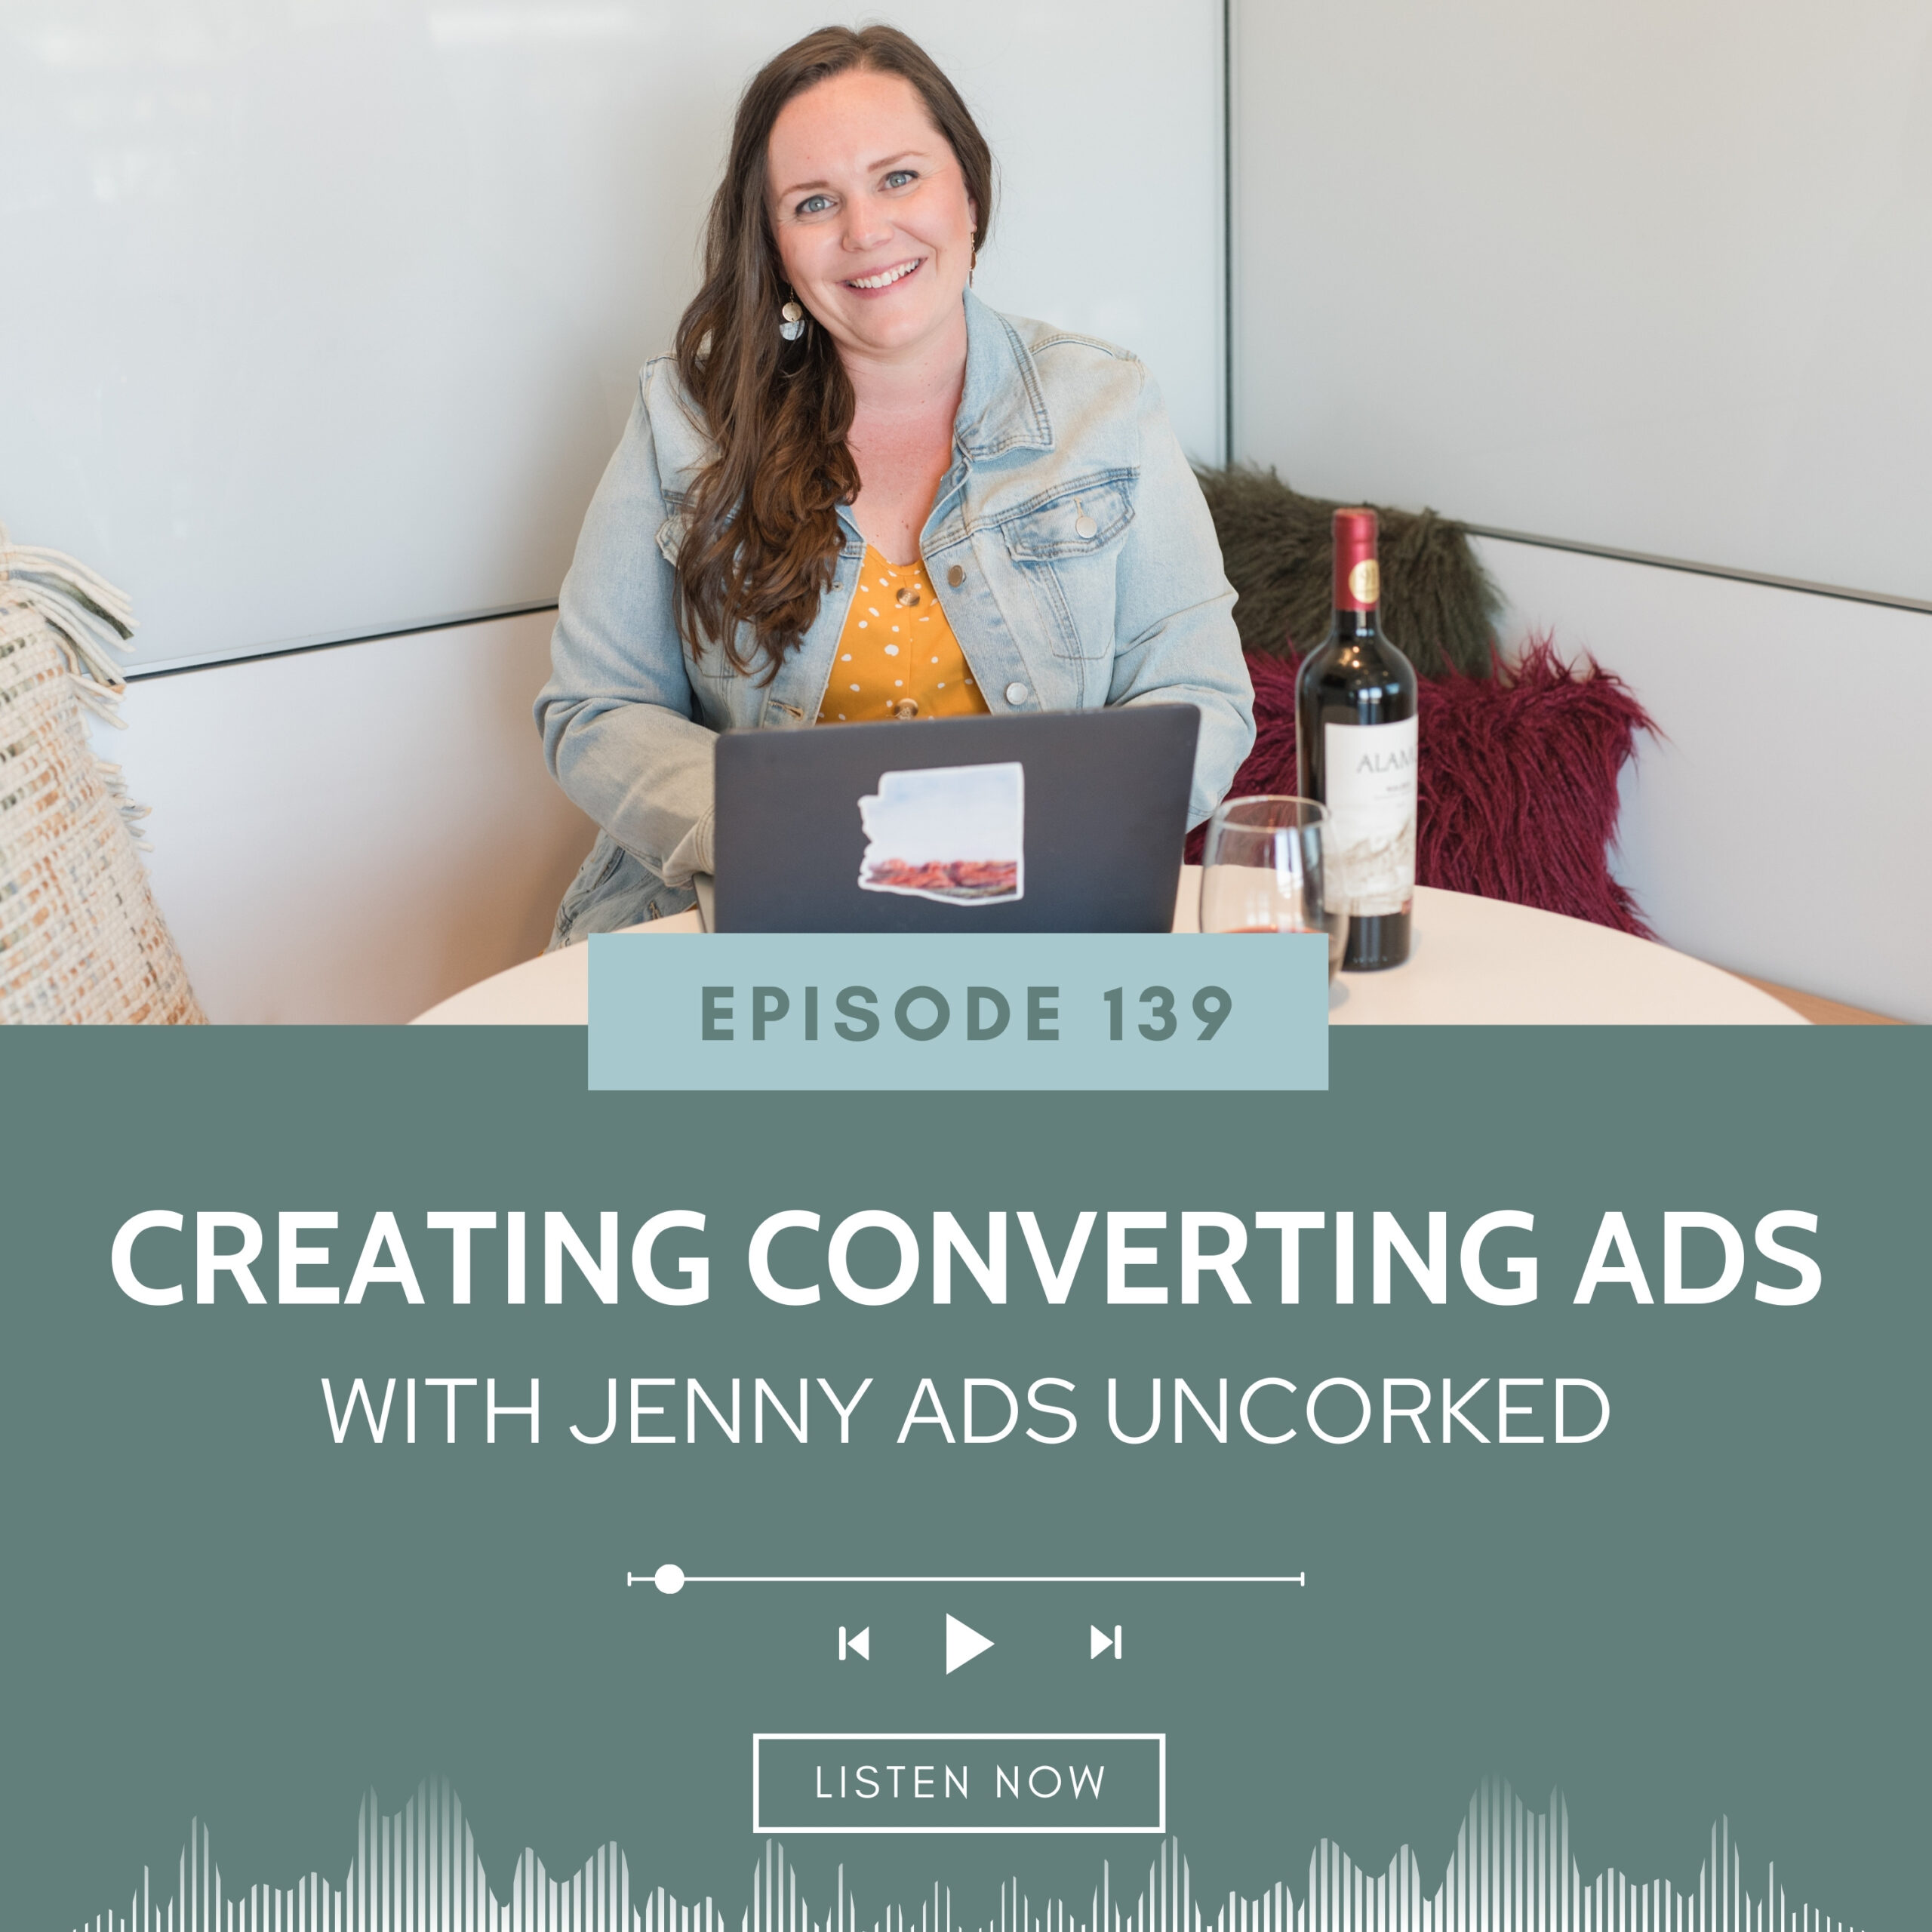 Podcast - How To Create Converting Facebook Ads with Ads Uncorked and Quianna Marie Weekly